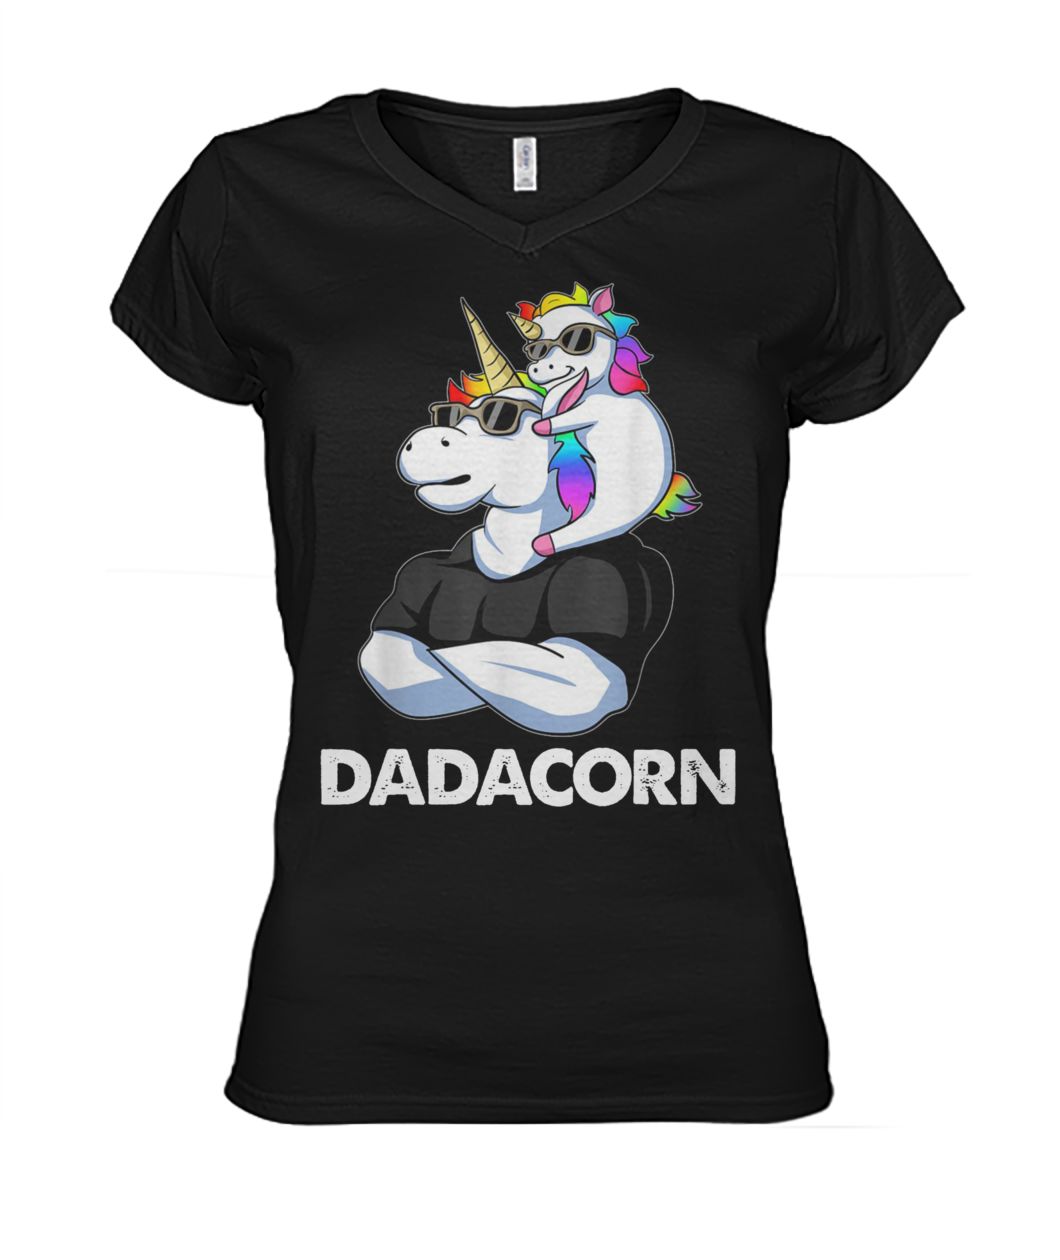 Dadacorn unicorn dad and baby father's day women's v-neck